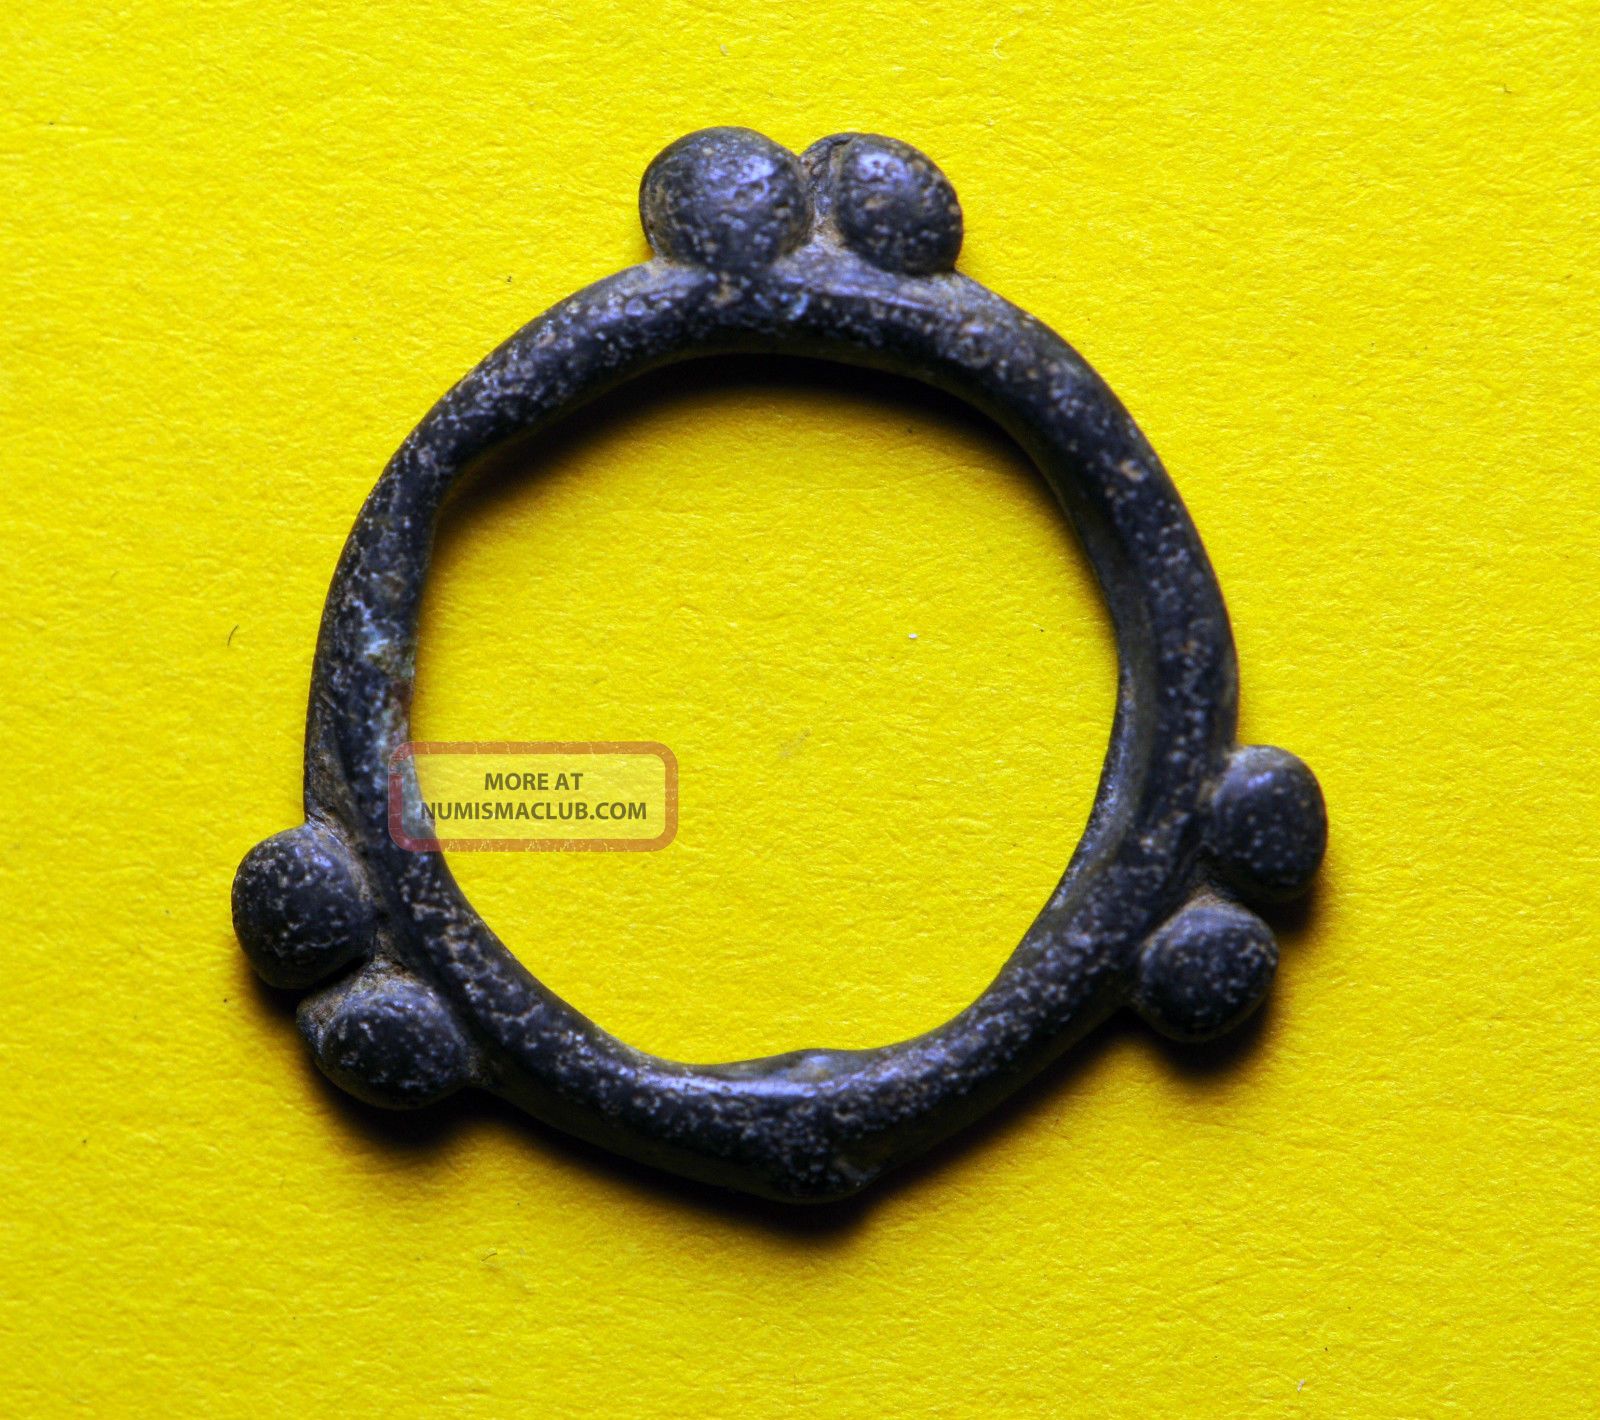 Authentic Celtic Ring Proto Money - Rare - Extremely Quality (0564) Coins: Medieval photo